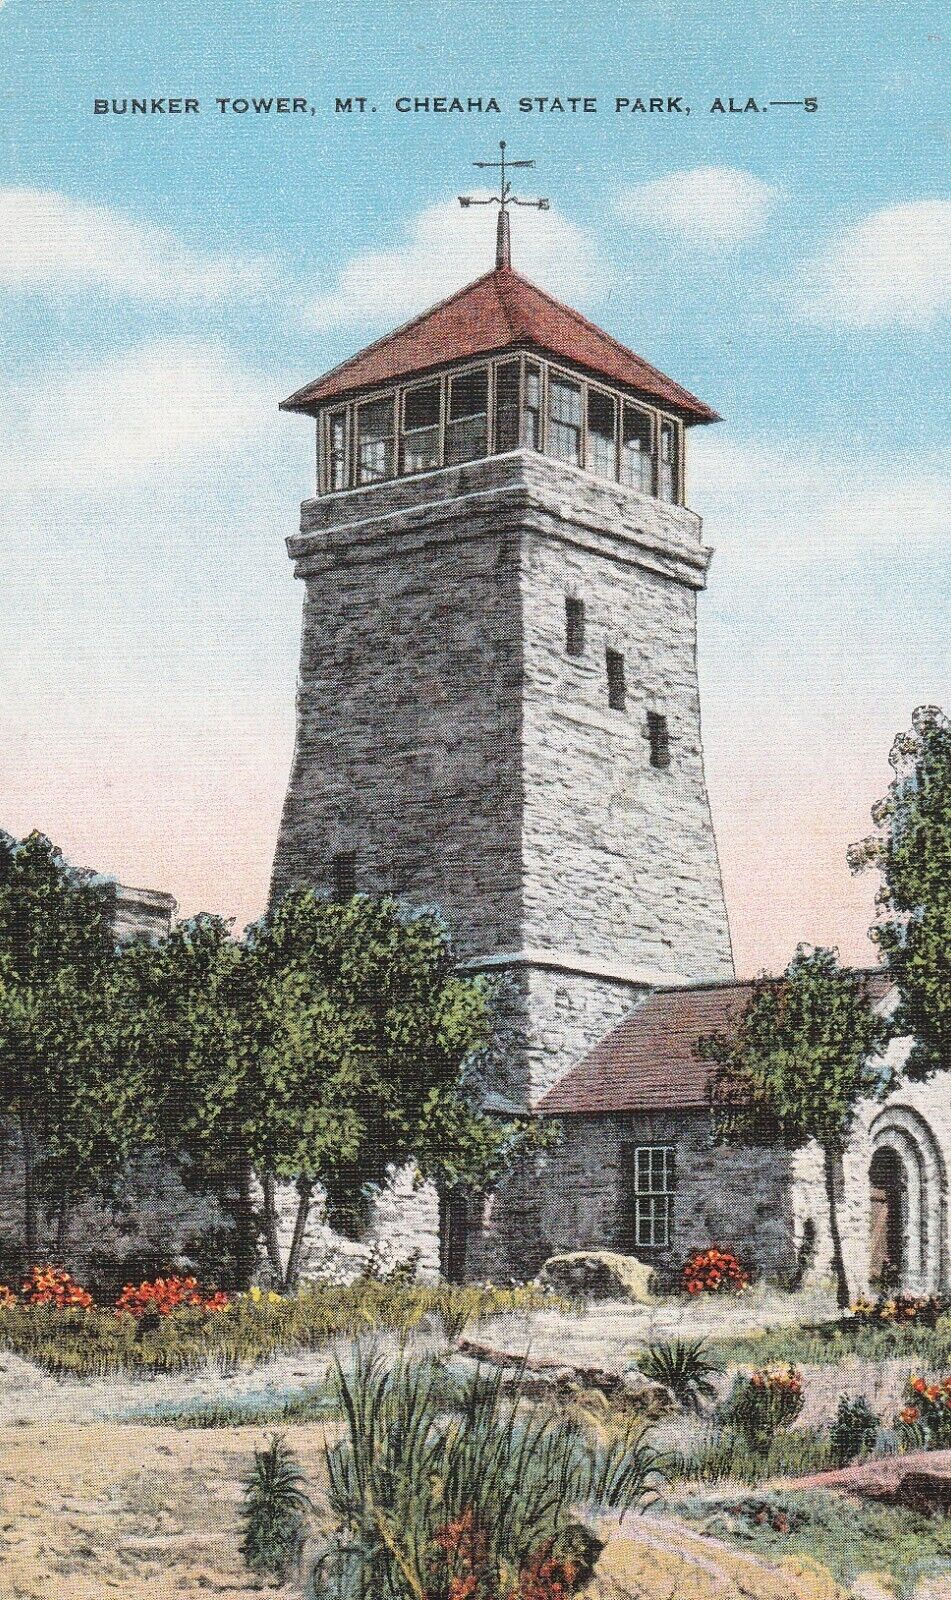 BUNKER TOWER, MT. CHEAHA STATE PARK, ALABAMA, C.1940\'S.